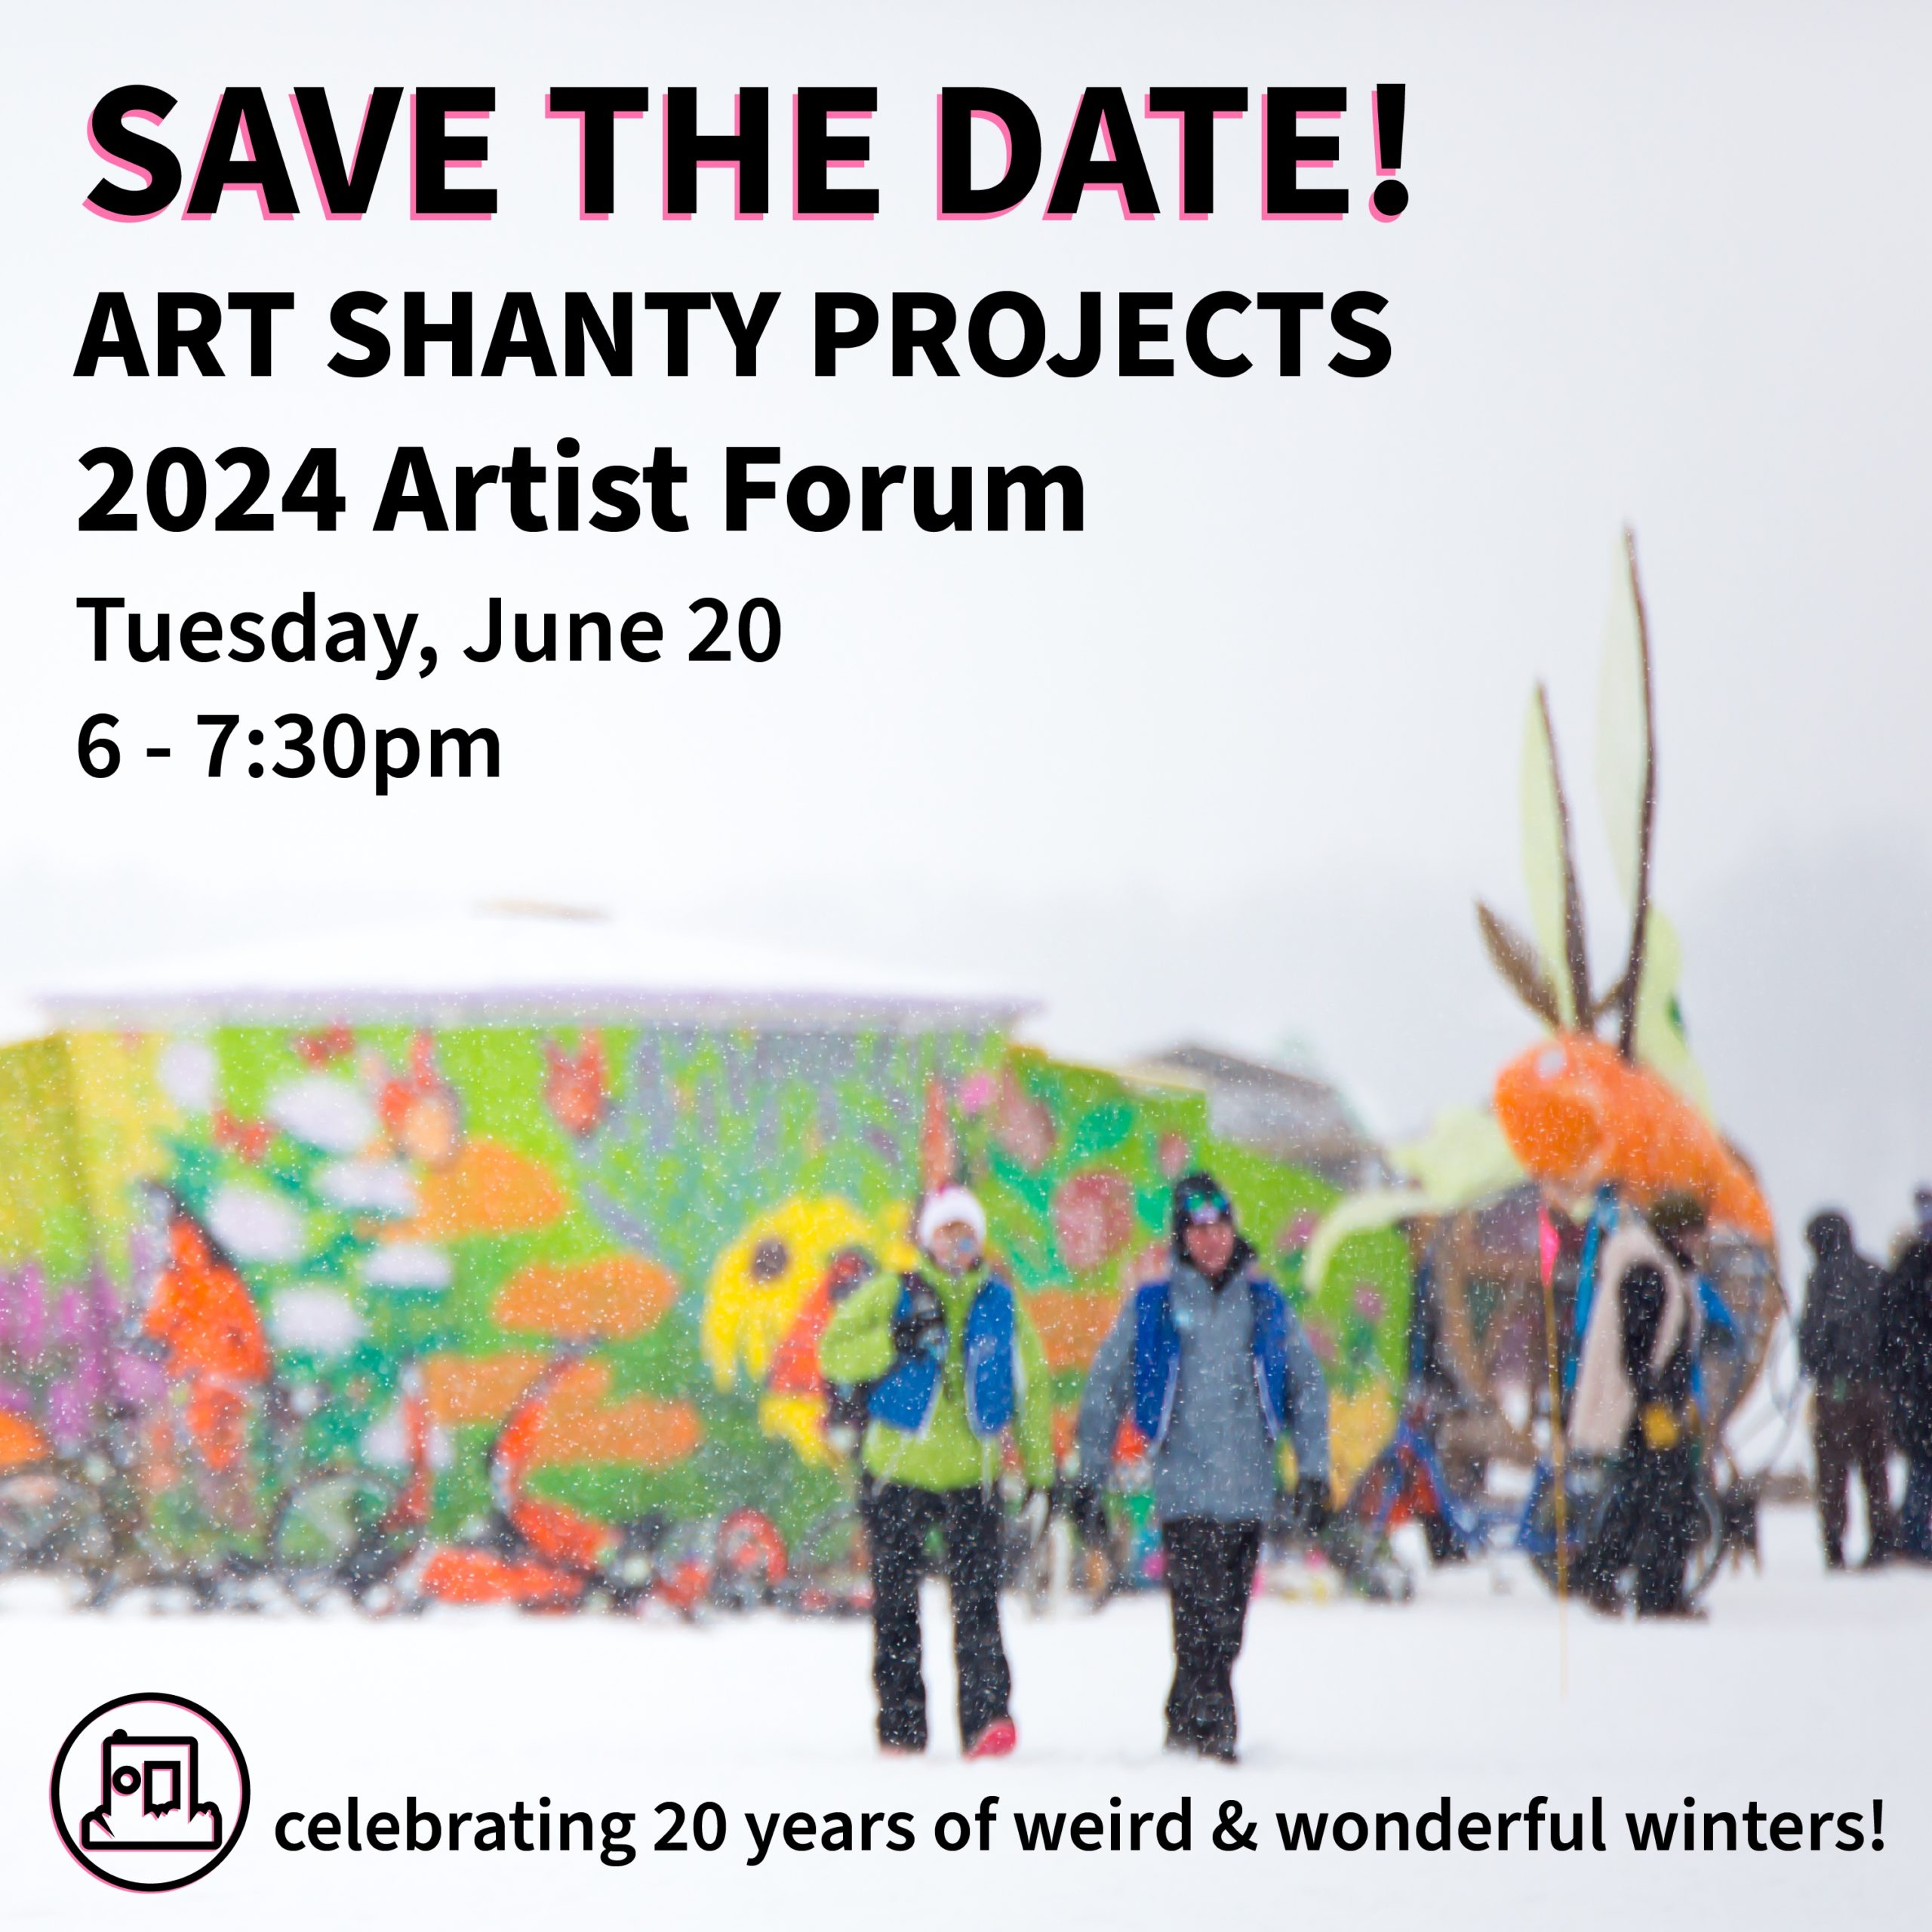 People walk through a snowstorm to a colorful shanty. Words read: "save the date! art shanty projects 2024 Artist Forum, June 20, 6-7:30pm. Celebrating 20 years of weird and wonderful winters!'